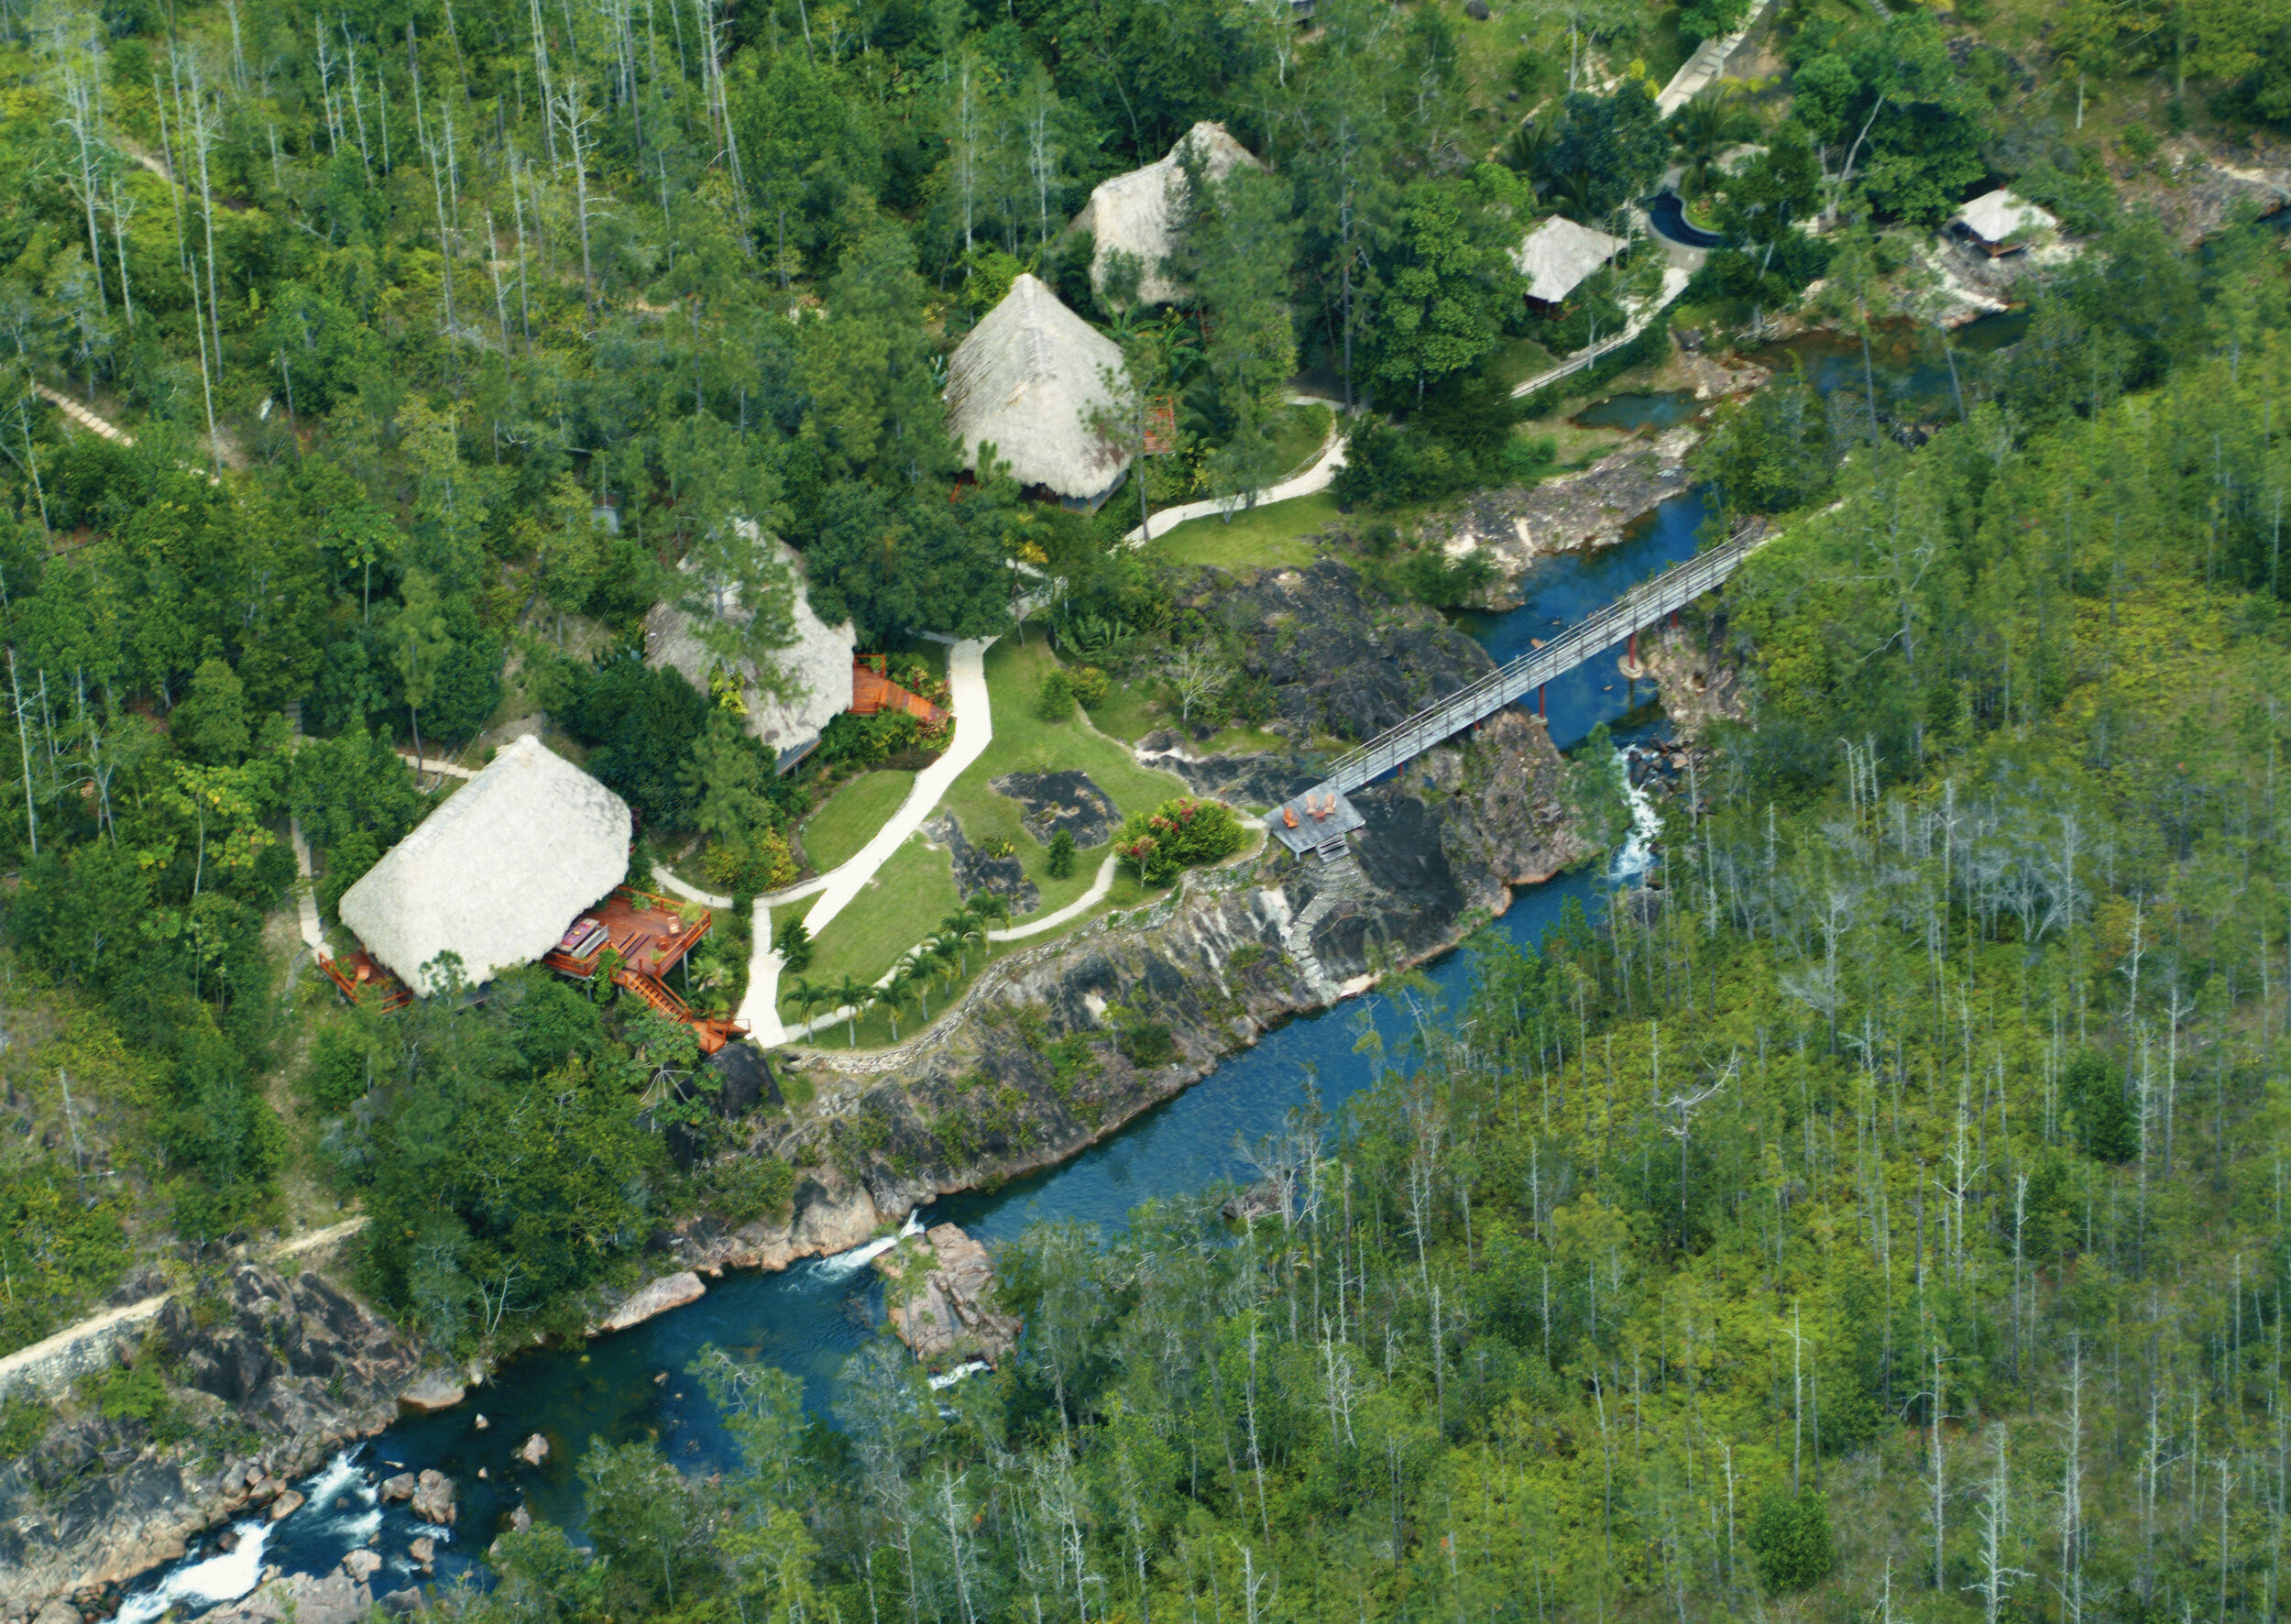   An overhead look at Blancaneaux Lodge (photo credit: The Family Coppola Hideaways)  